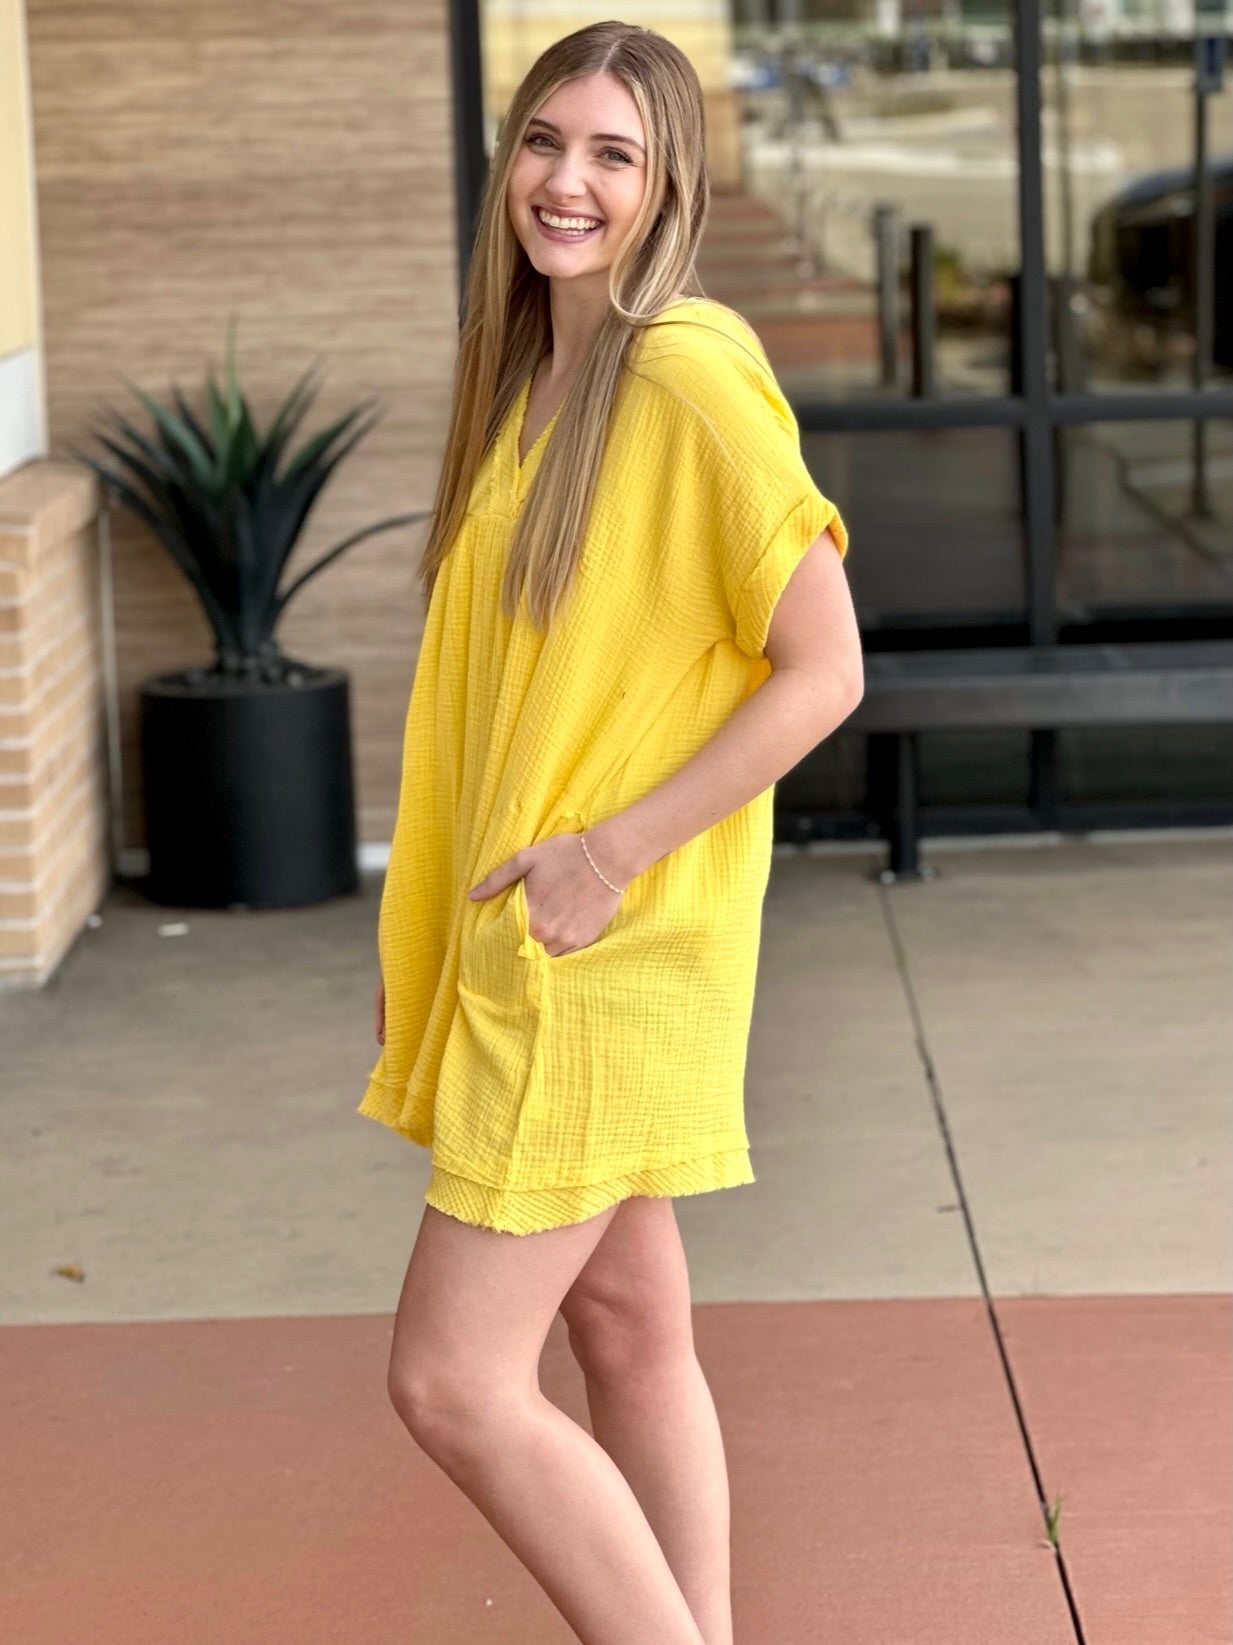 Lexi in yellow dress side view hand in pocket